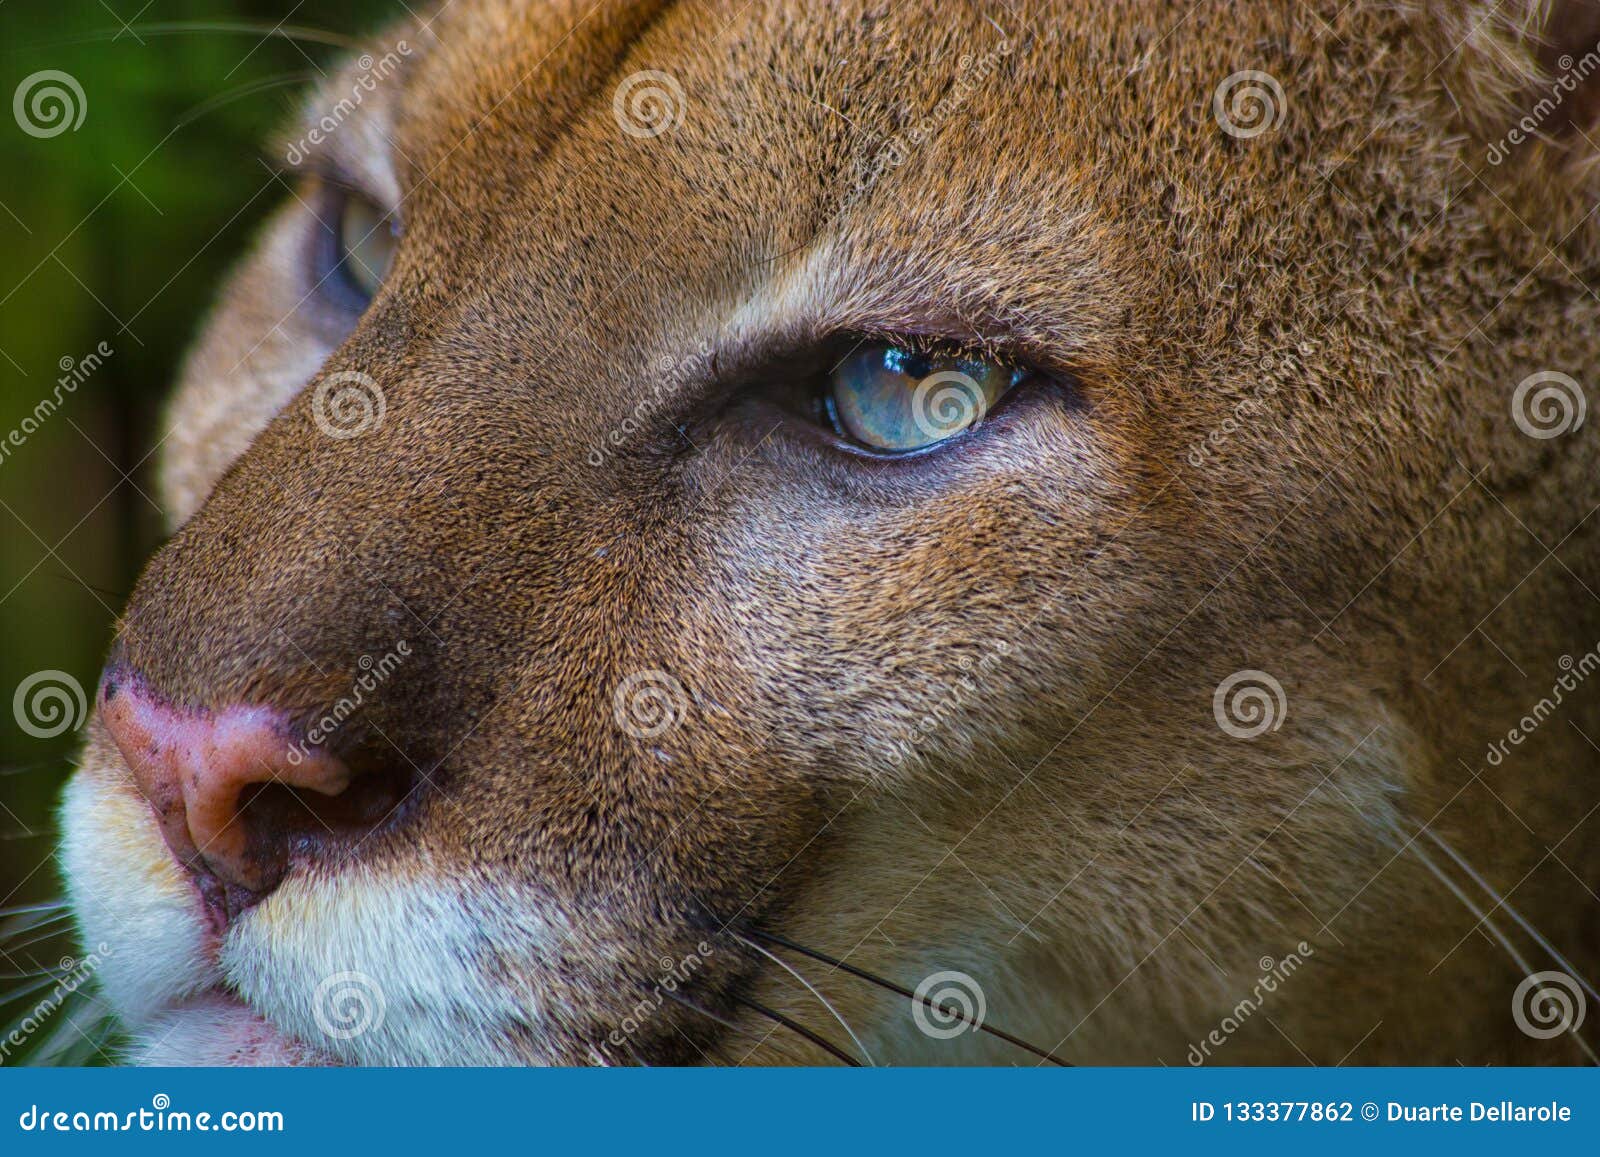 wherever gap Barber shop Close Up Portrait of a Puma or Cougar with Blue Eyes Stock Photo - Image of  fierce, life: 133377862